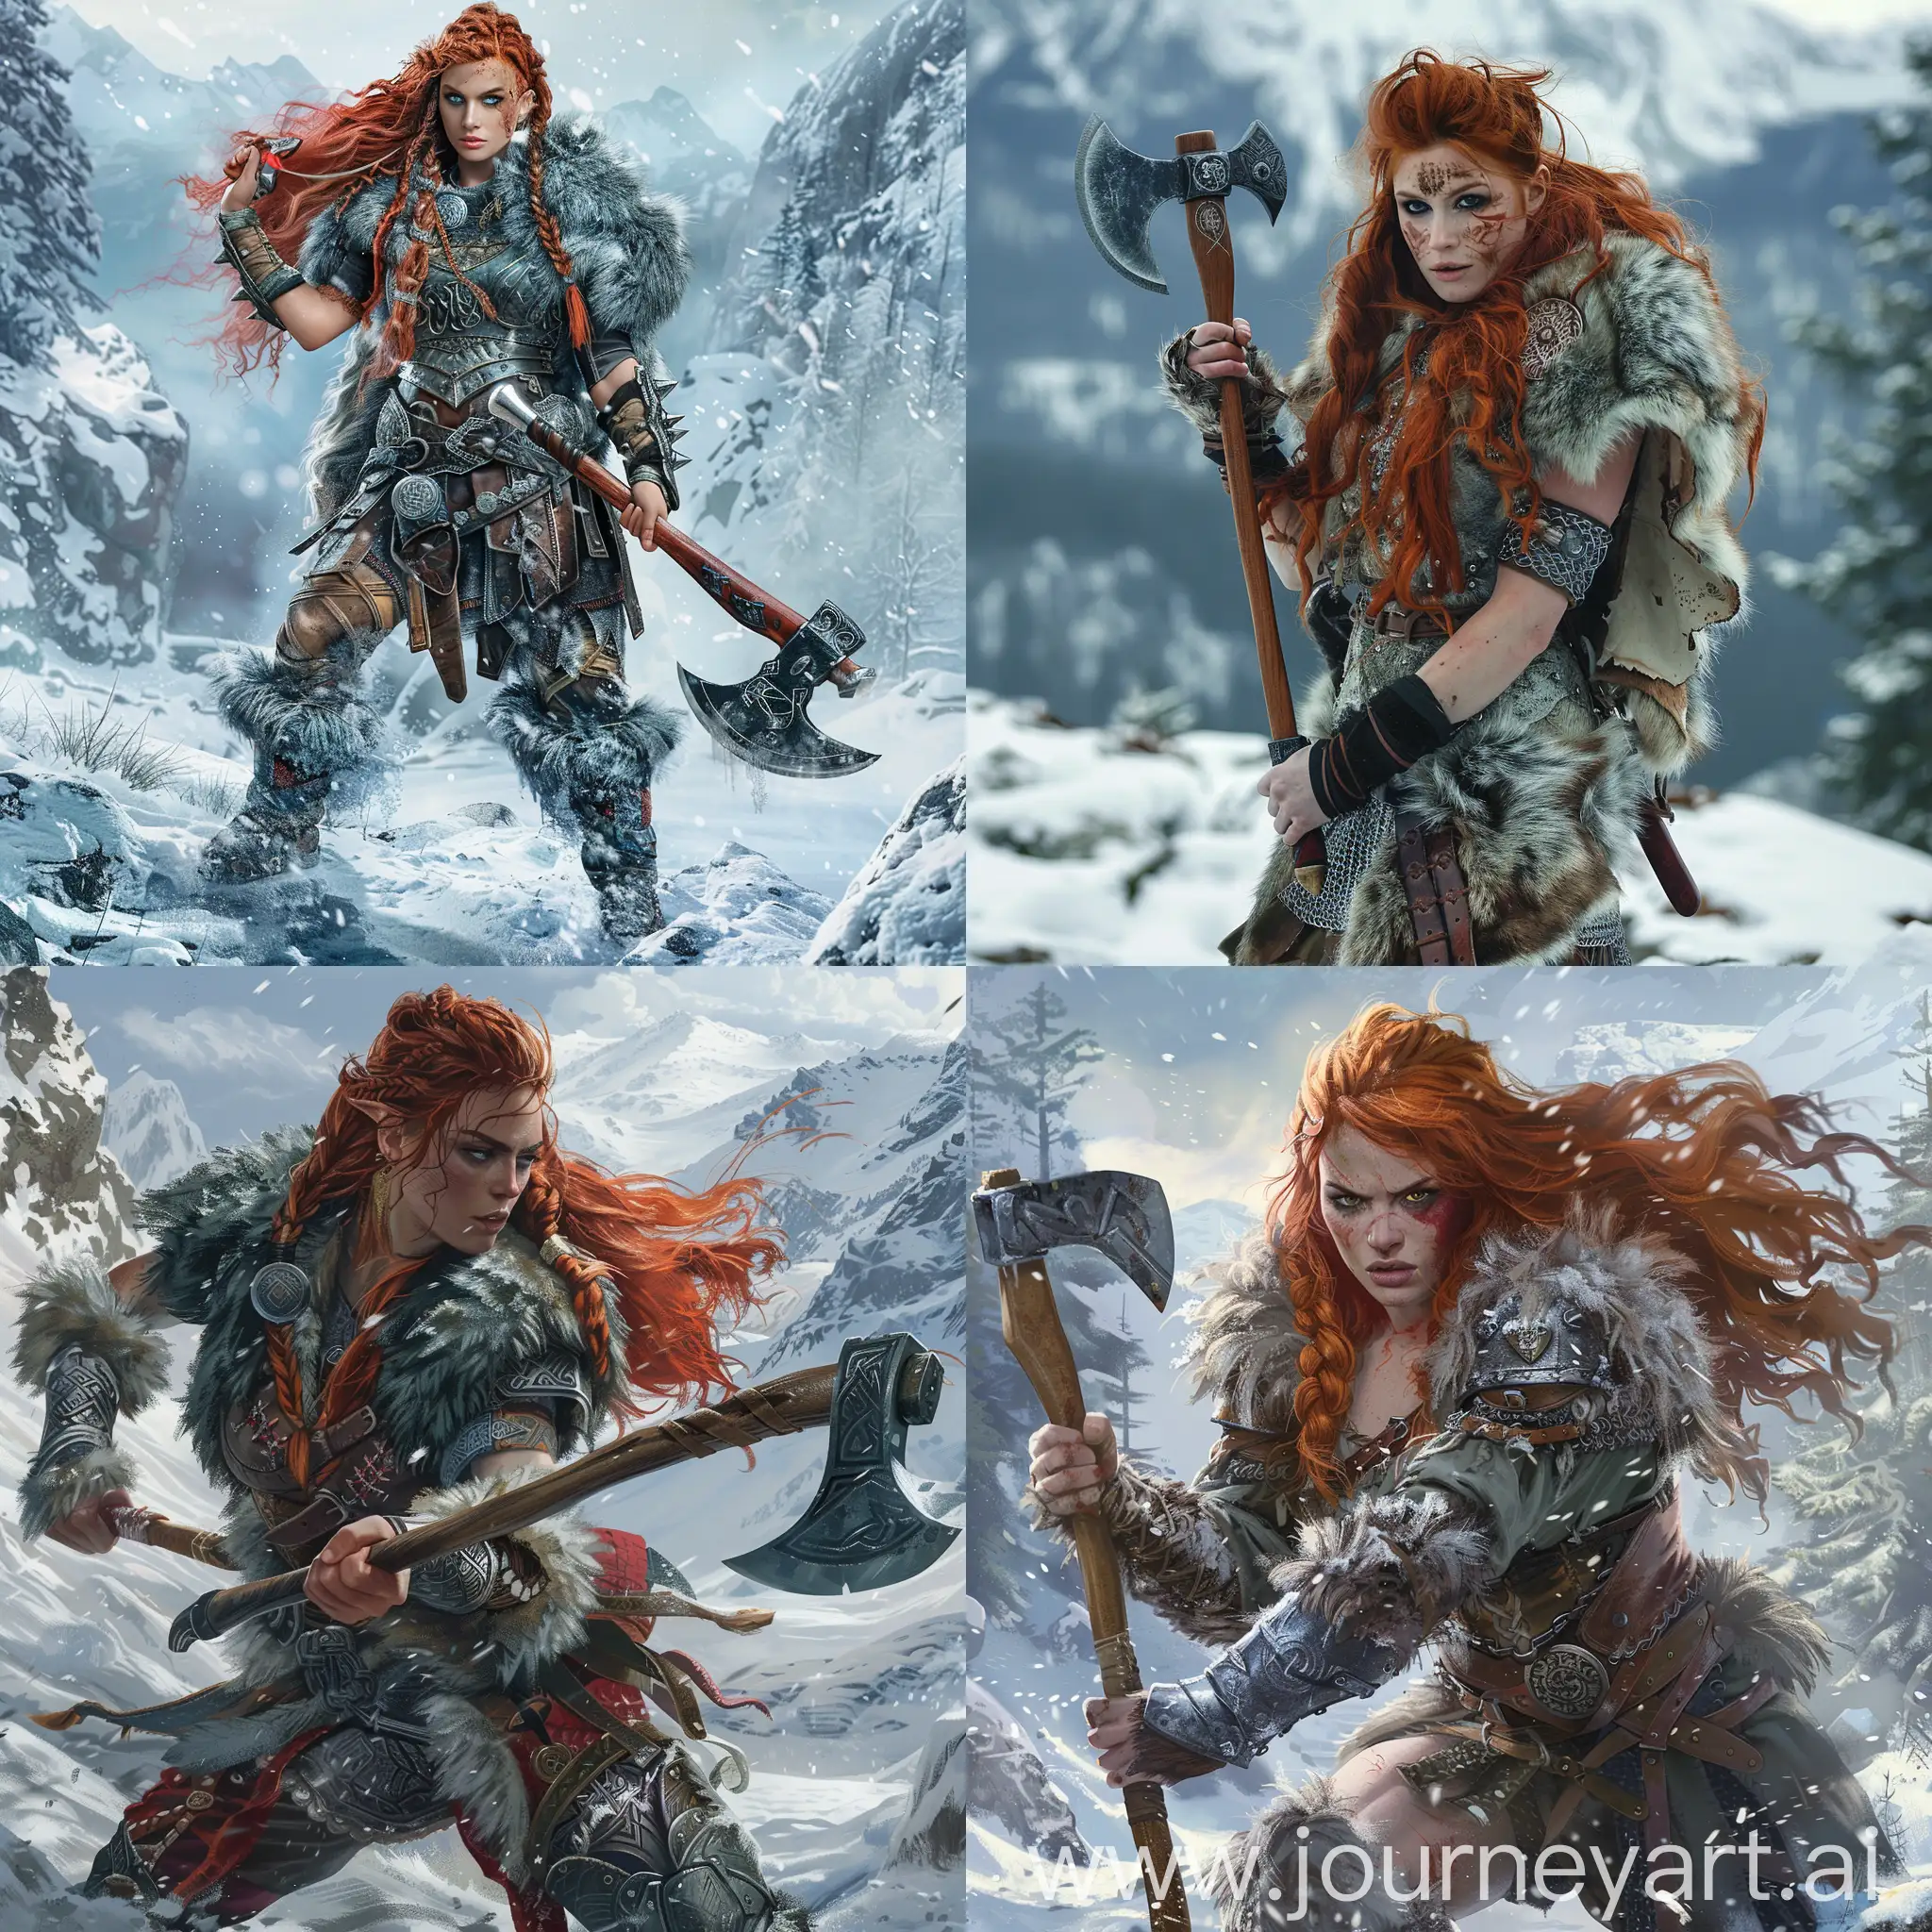 redhaired viking woman, armed with an axe and fully clothed with fur armor, in a snowy mountainous environment